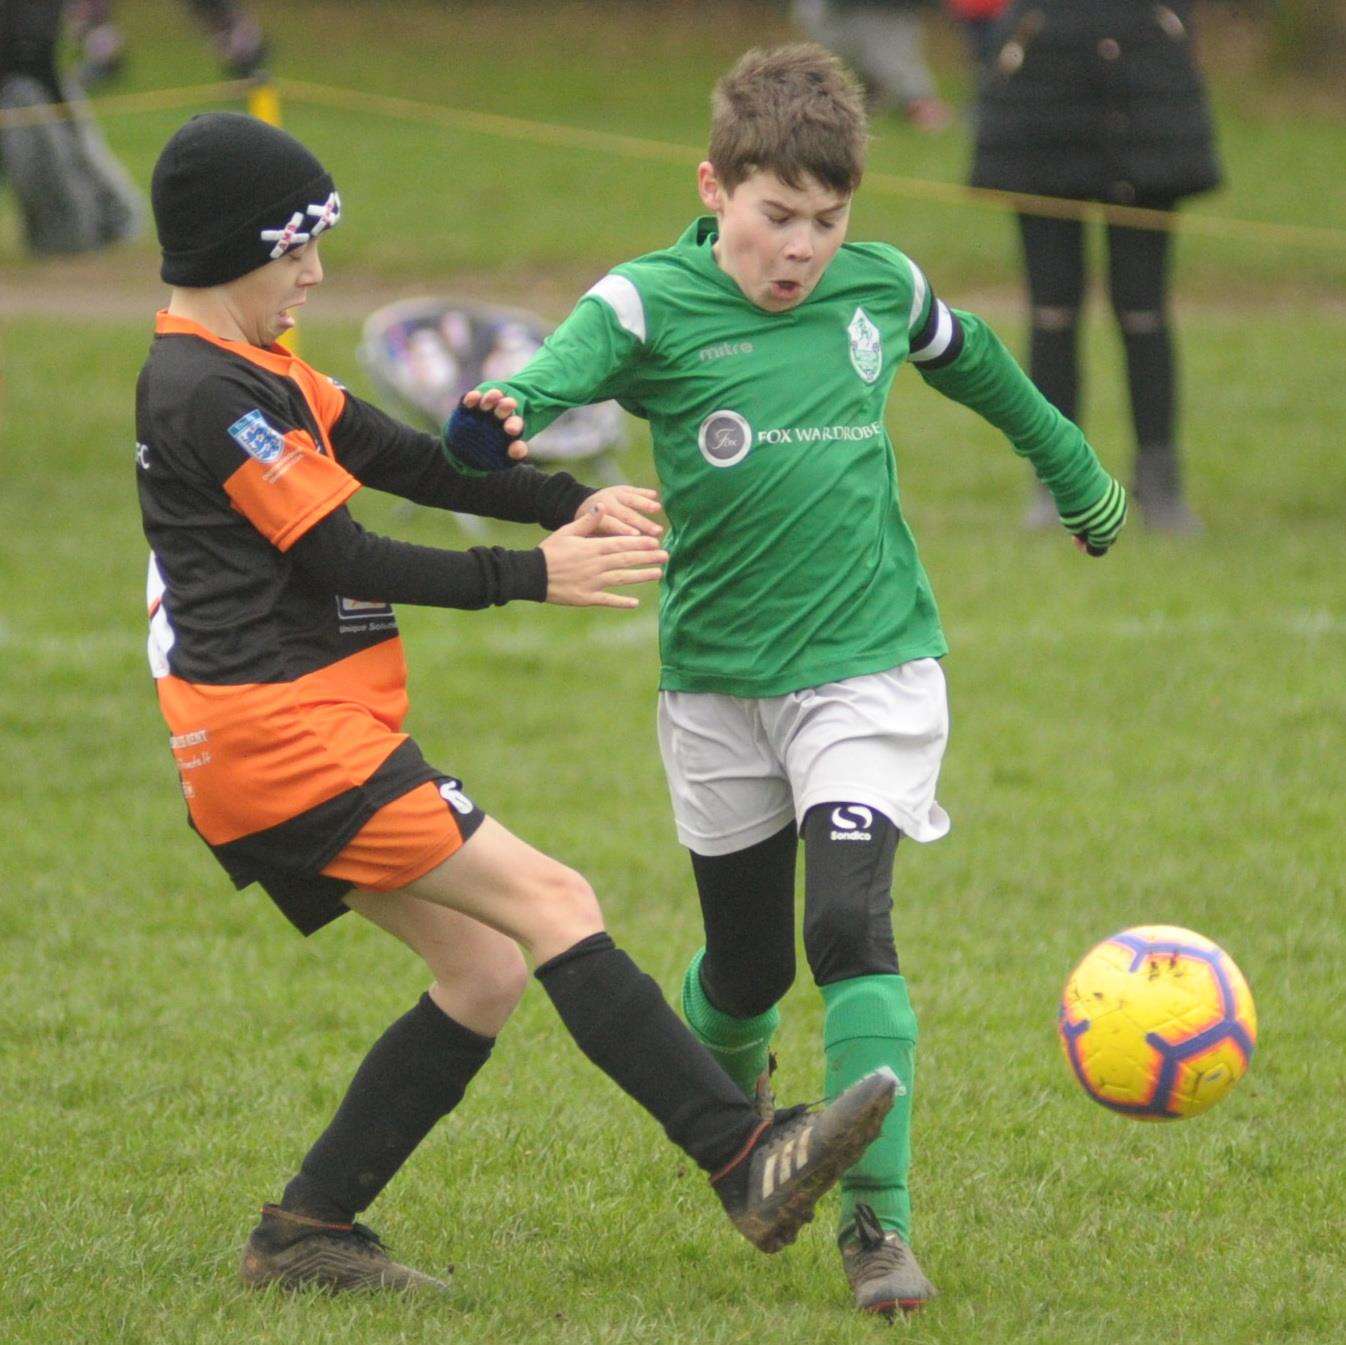 Pegasus 81 under-10s and Horsted Youth under-10s battle for possession. Picture: Steve Crispe FM6473902